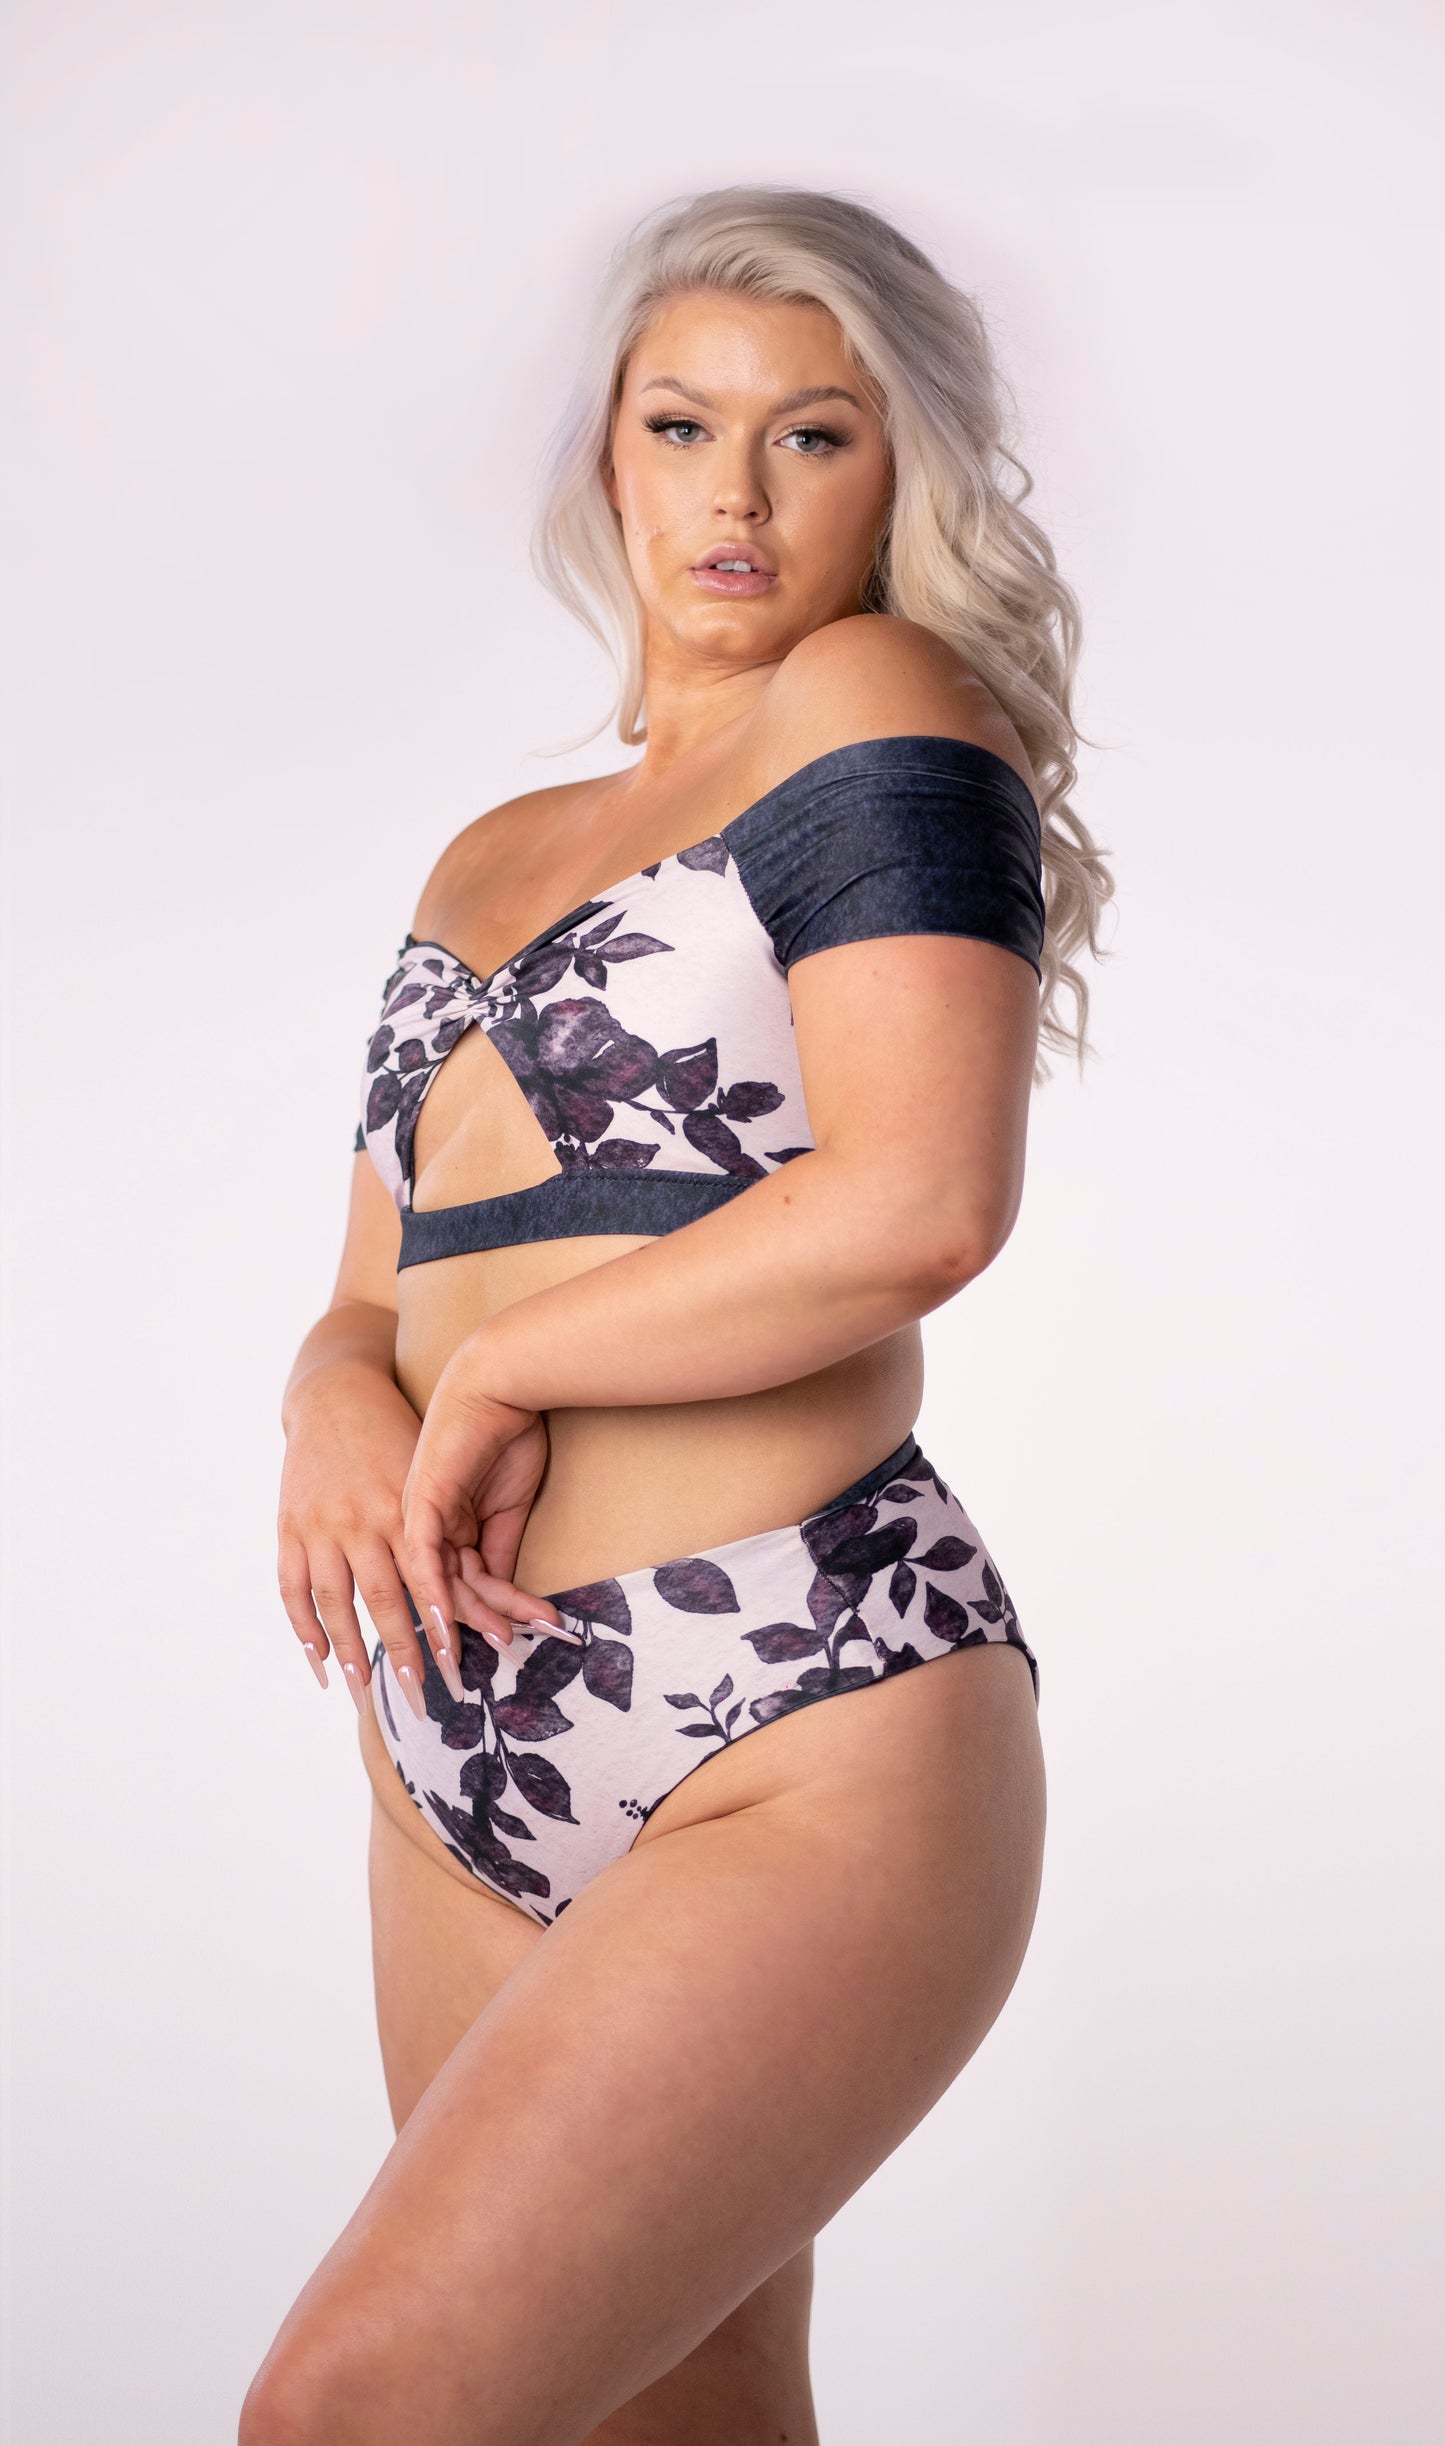 A reversible off the shoulder bikini top, solid navy blue wash on one side and on the other, a girlie pink floral pattern featuring blue hibiscus watercolour print. The front features a traingular cut away under the bust and a gathered center detail. The sleeves and broad elastic chest band neatly frame the design in solid navy blue.